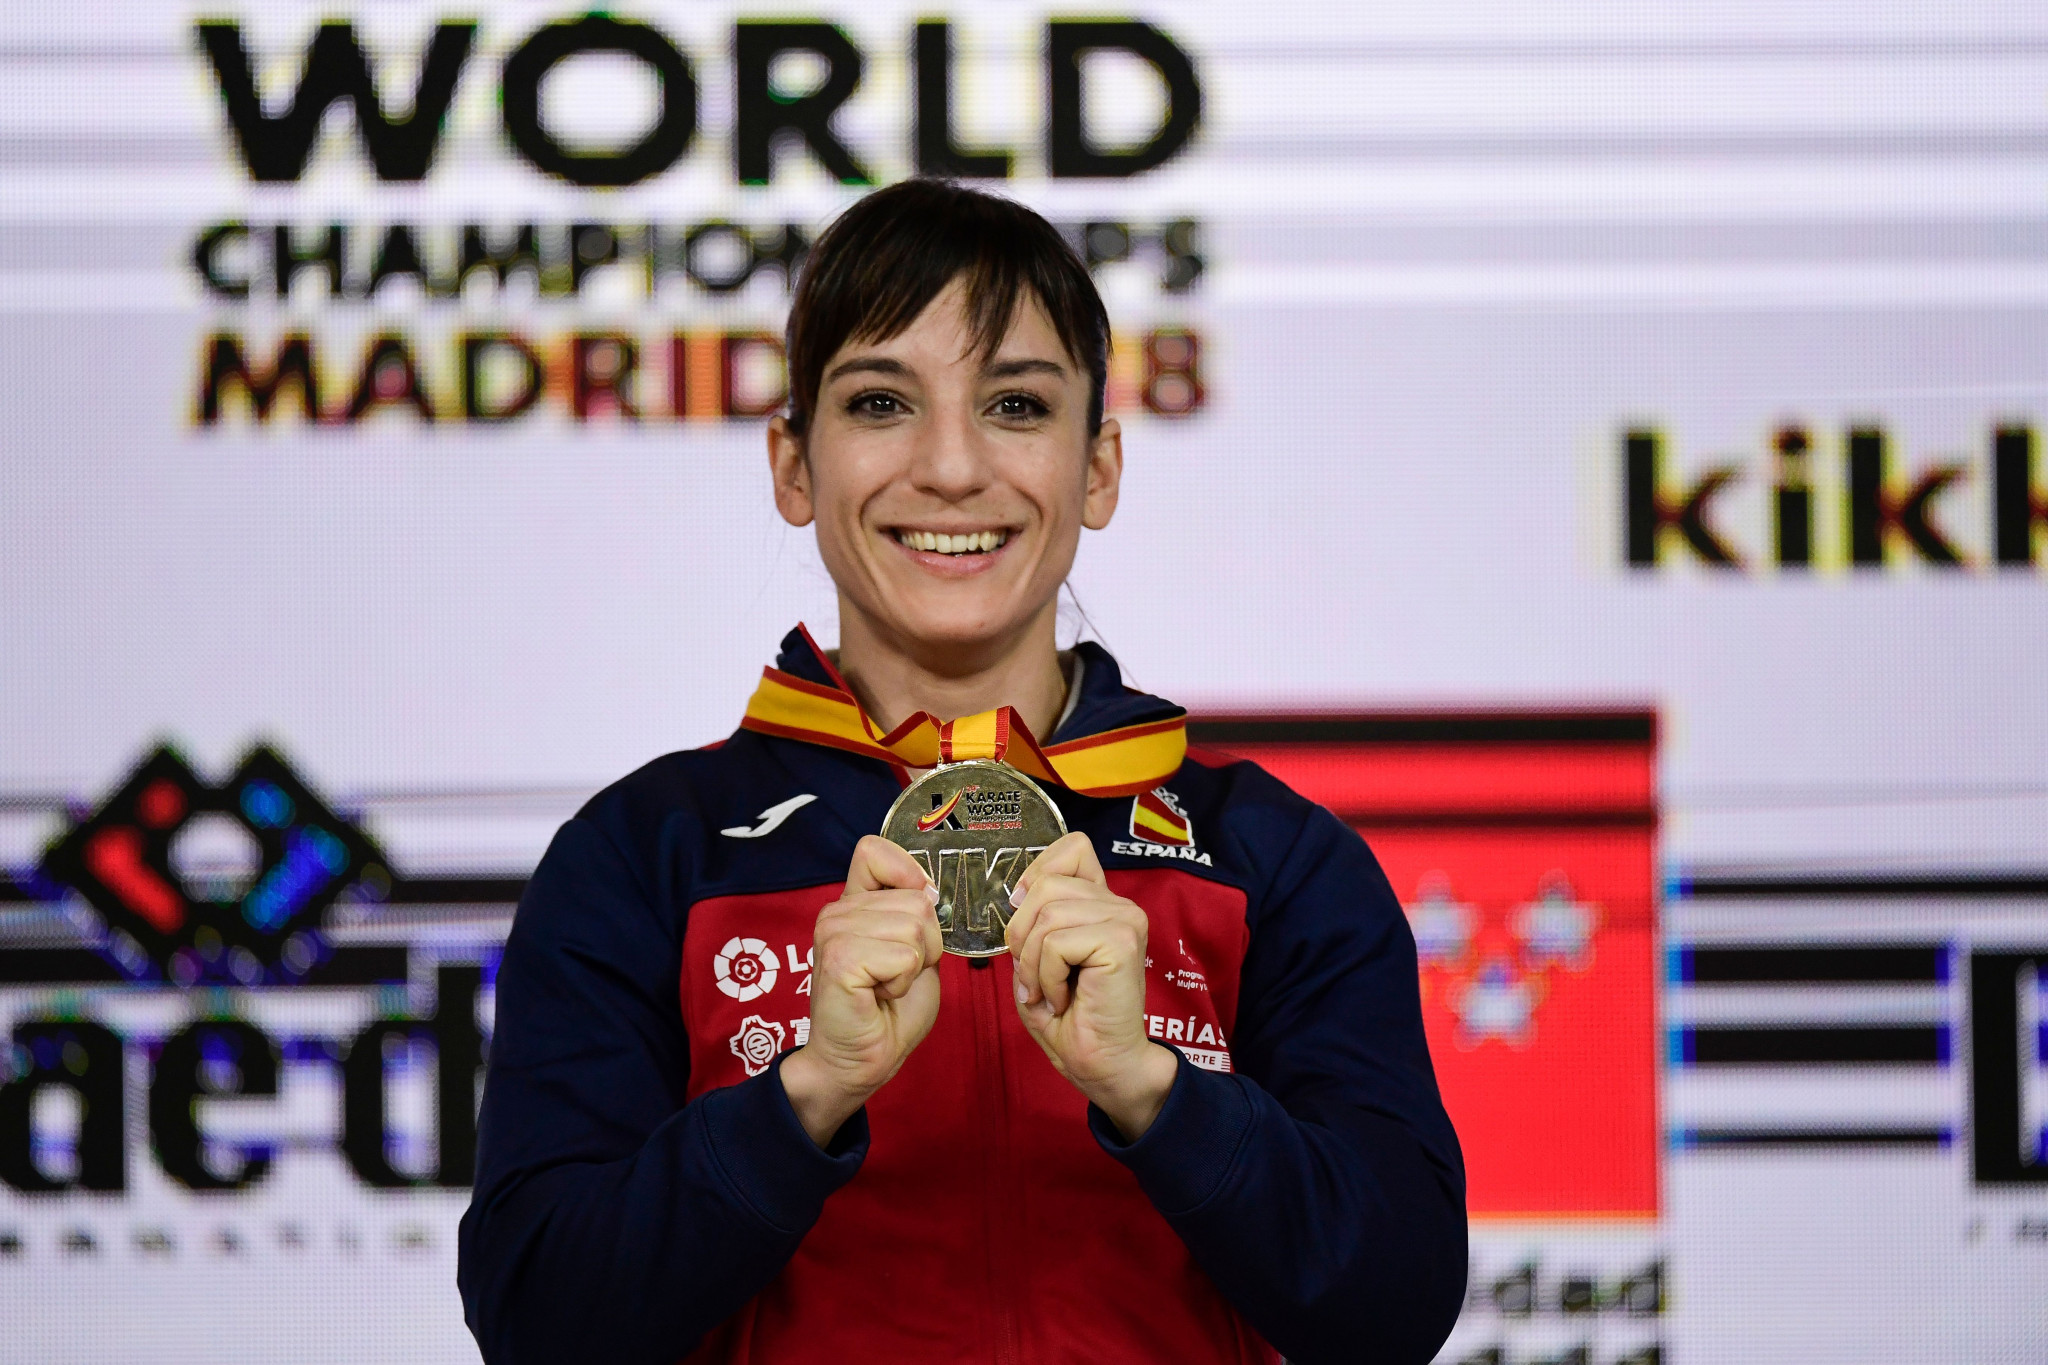 Sandra Sanchez Jaime of Spain will compete in the ANOC World Beach Games in San Diego after winning gold in the Karate World Championships in Madrid ©Getty Images 